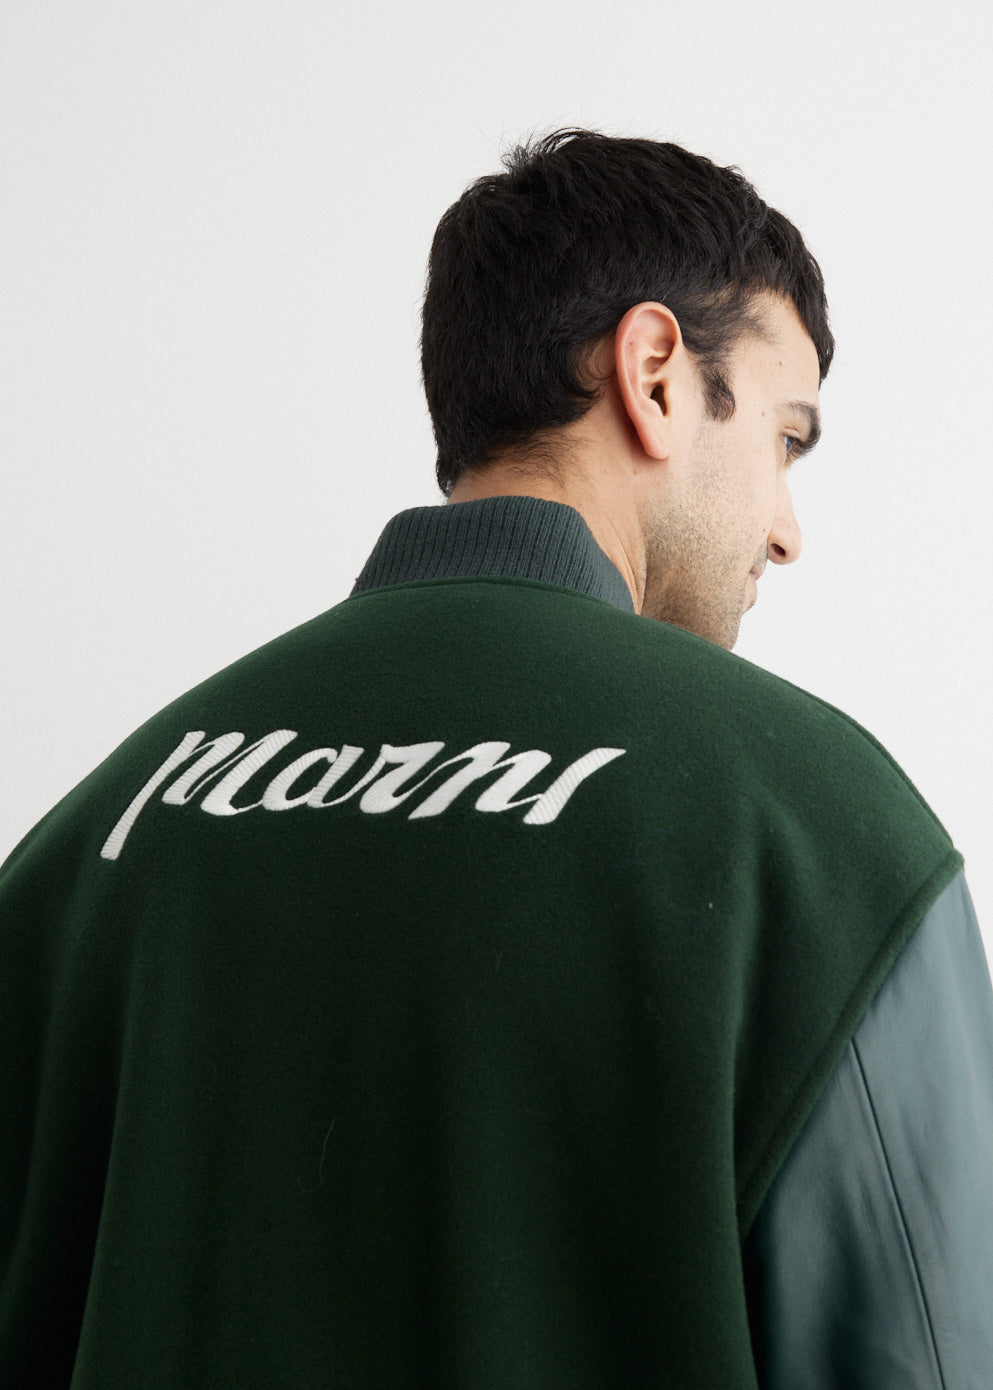 MARNI Logo-Appliquéd Striped Leather and Knitted Varsity Jacket for Men